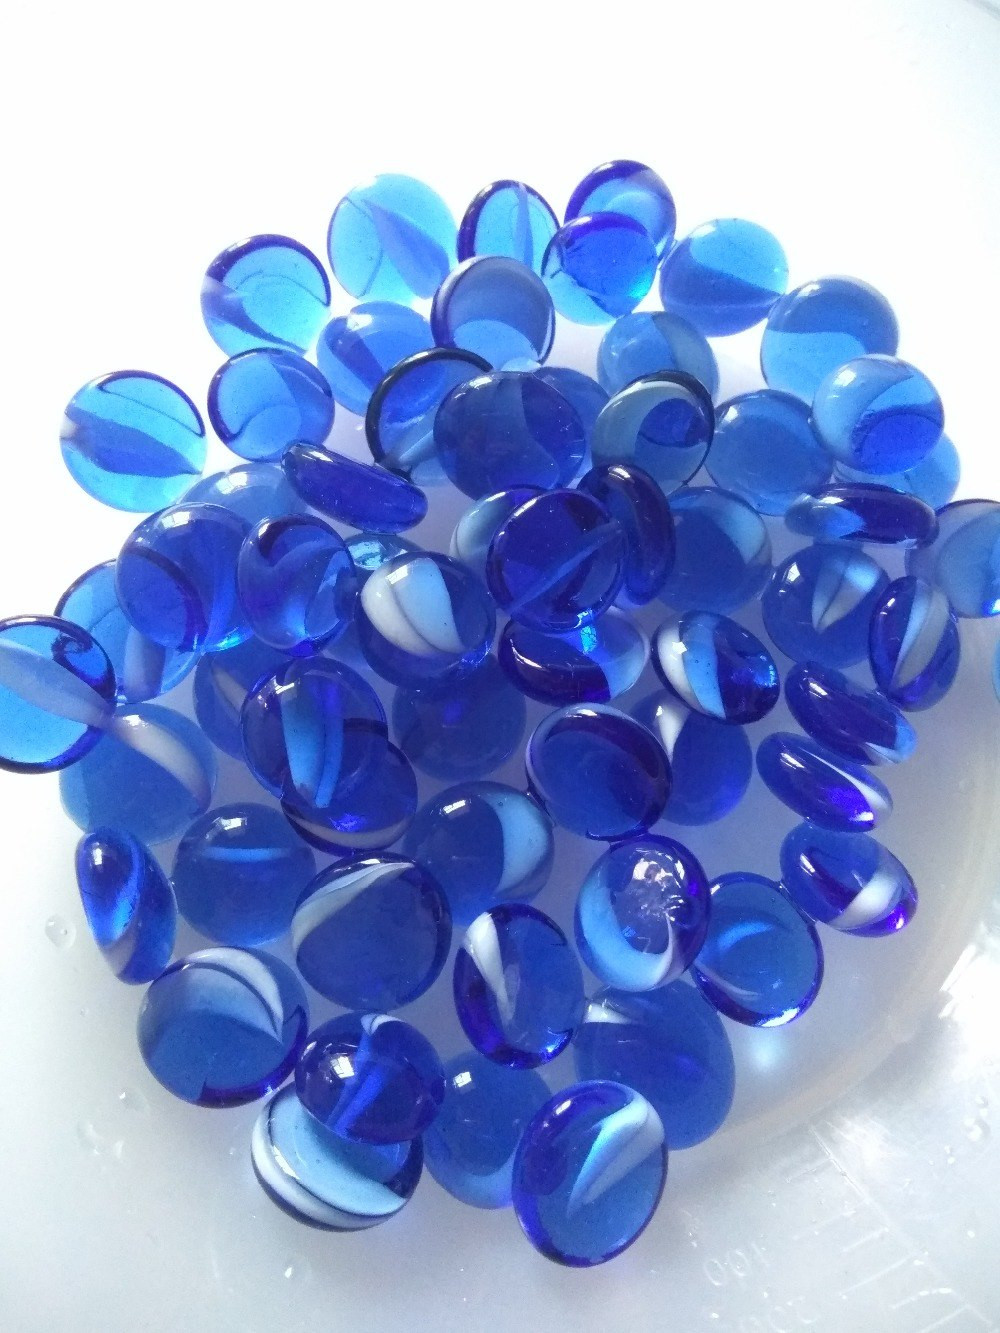 21 attractive Small Vase Filler Beads 2024 free download small vase filler beads of aliexpress com buy blue white color flat glass beads cats eye pertaining to aliexpress com buy blue white color flat glass beads cats eye stickers home fish tank v